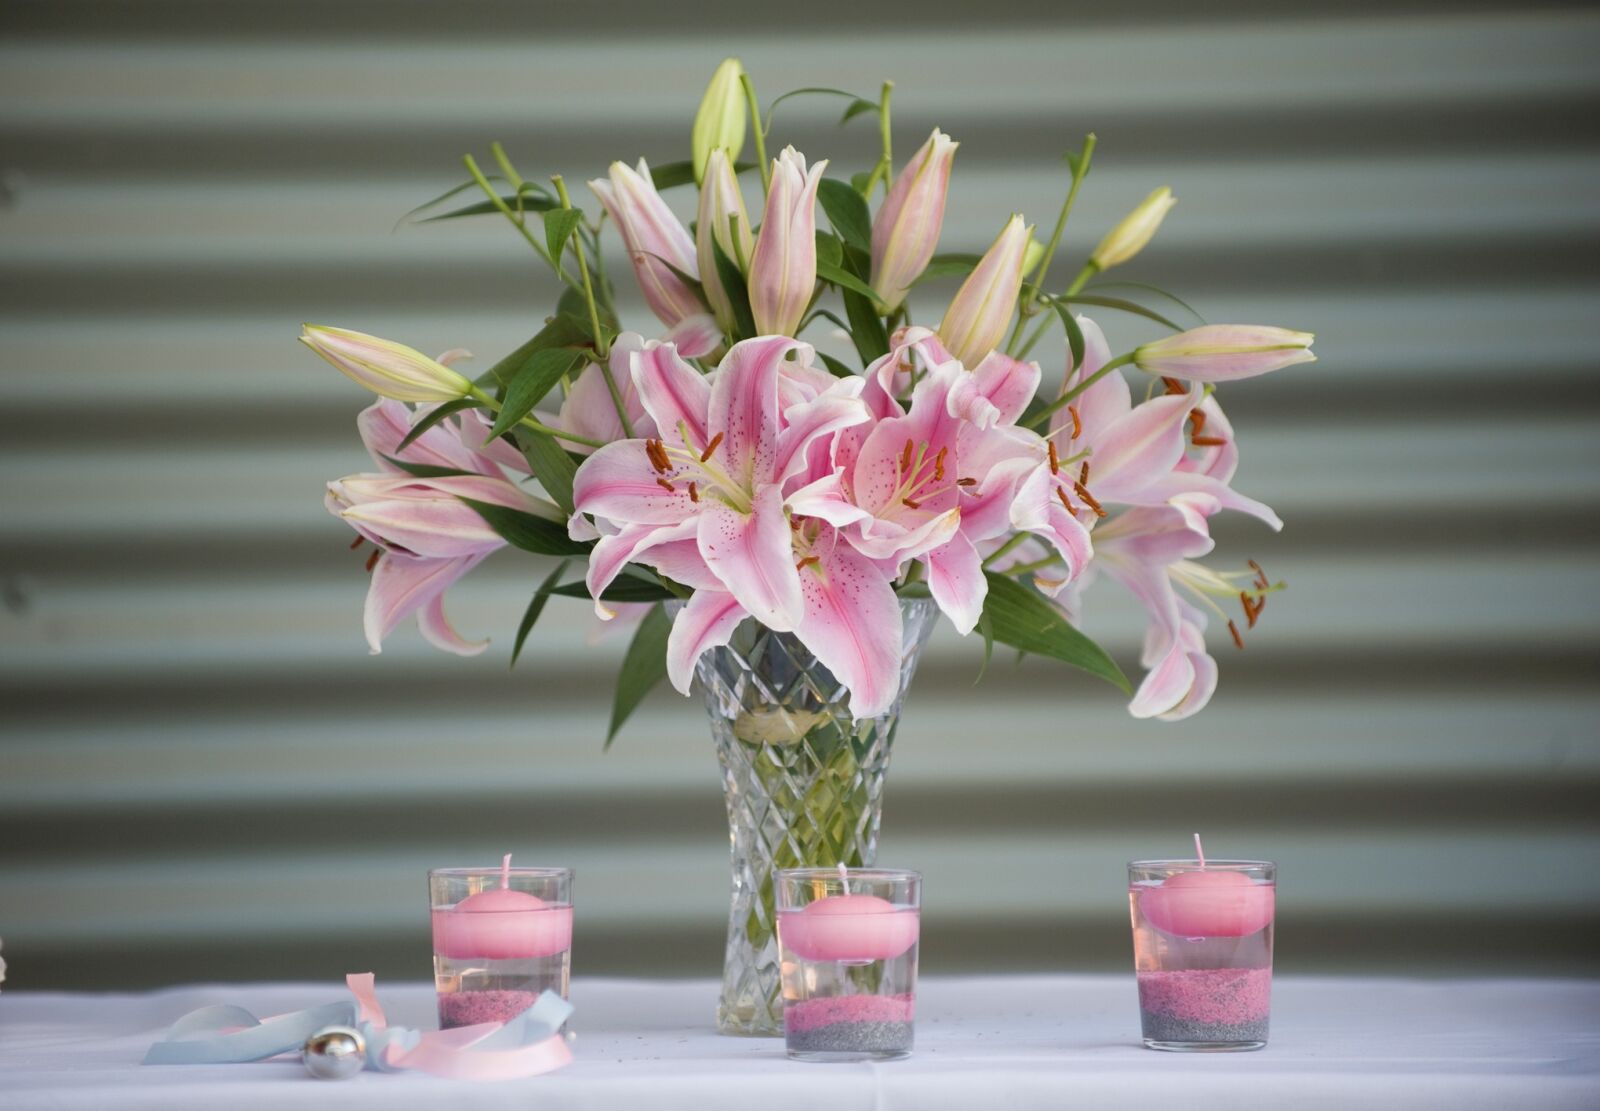 Nikon D700 sample photo. Lillies, lily, flowers photography